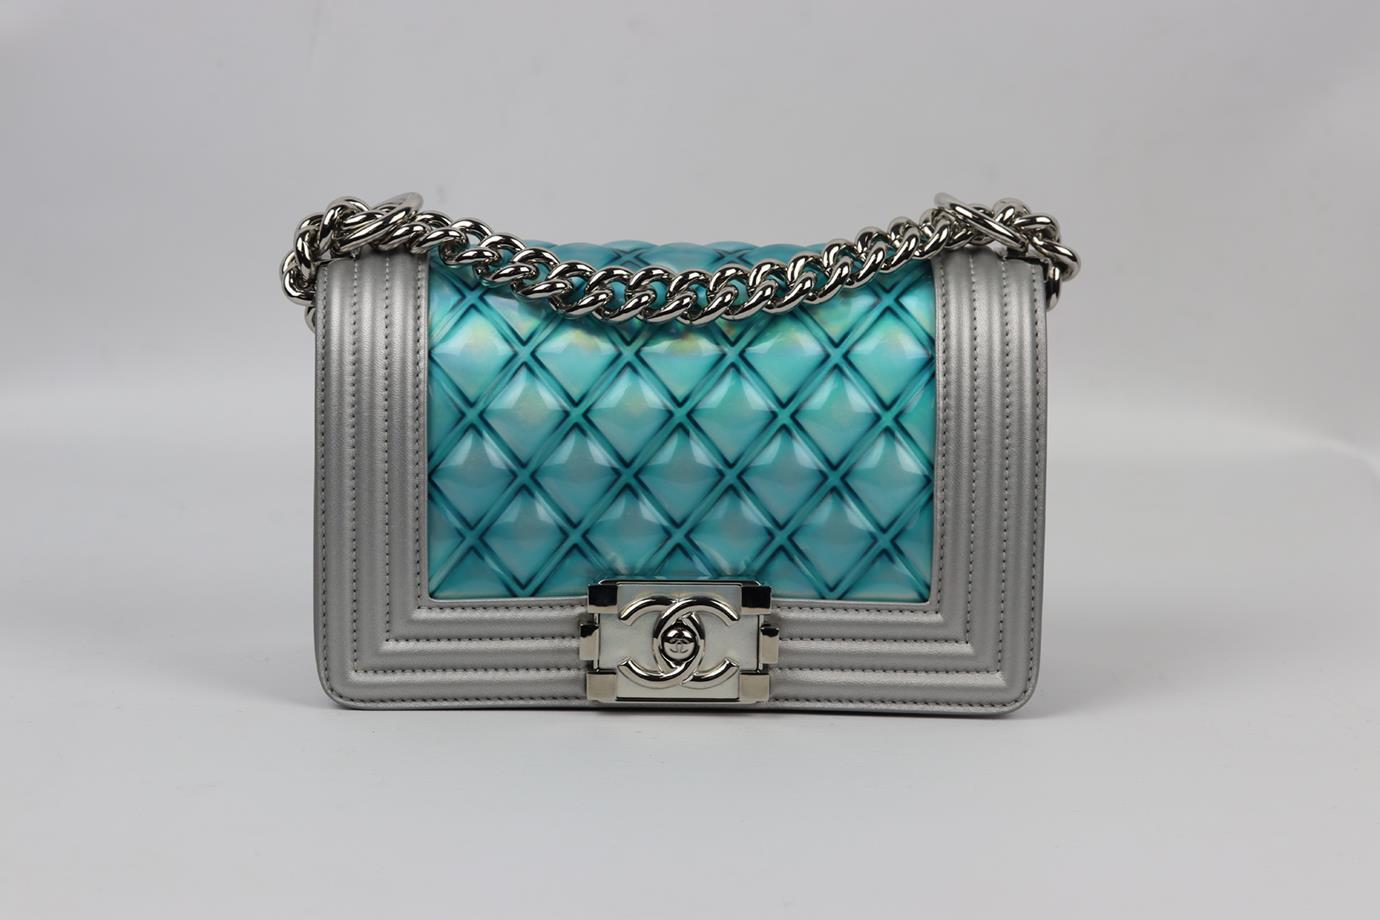 <ul>
<li>Chanel 2018 Water Boy small quilted pic and leather shoulder bag.</li>
<li>Made from blue quilted pvc with silver lambskin-leather and matching leather interior and palladium chain shoulder straps.</li>
<li>Blue and silver.</li>
<li>Push